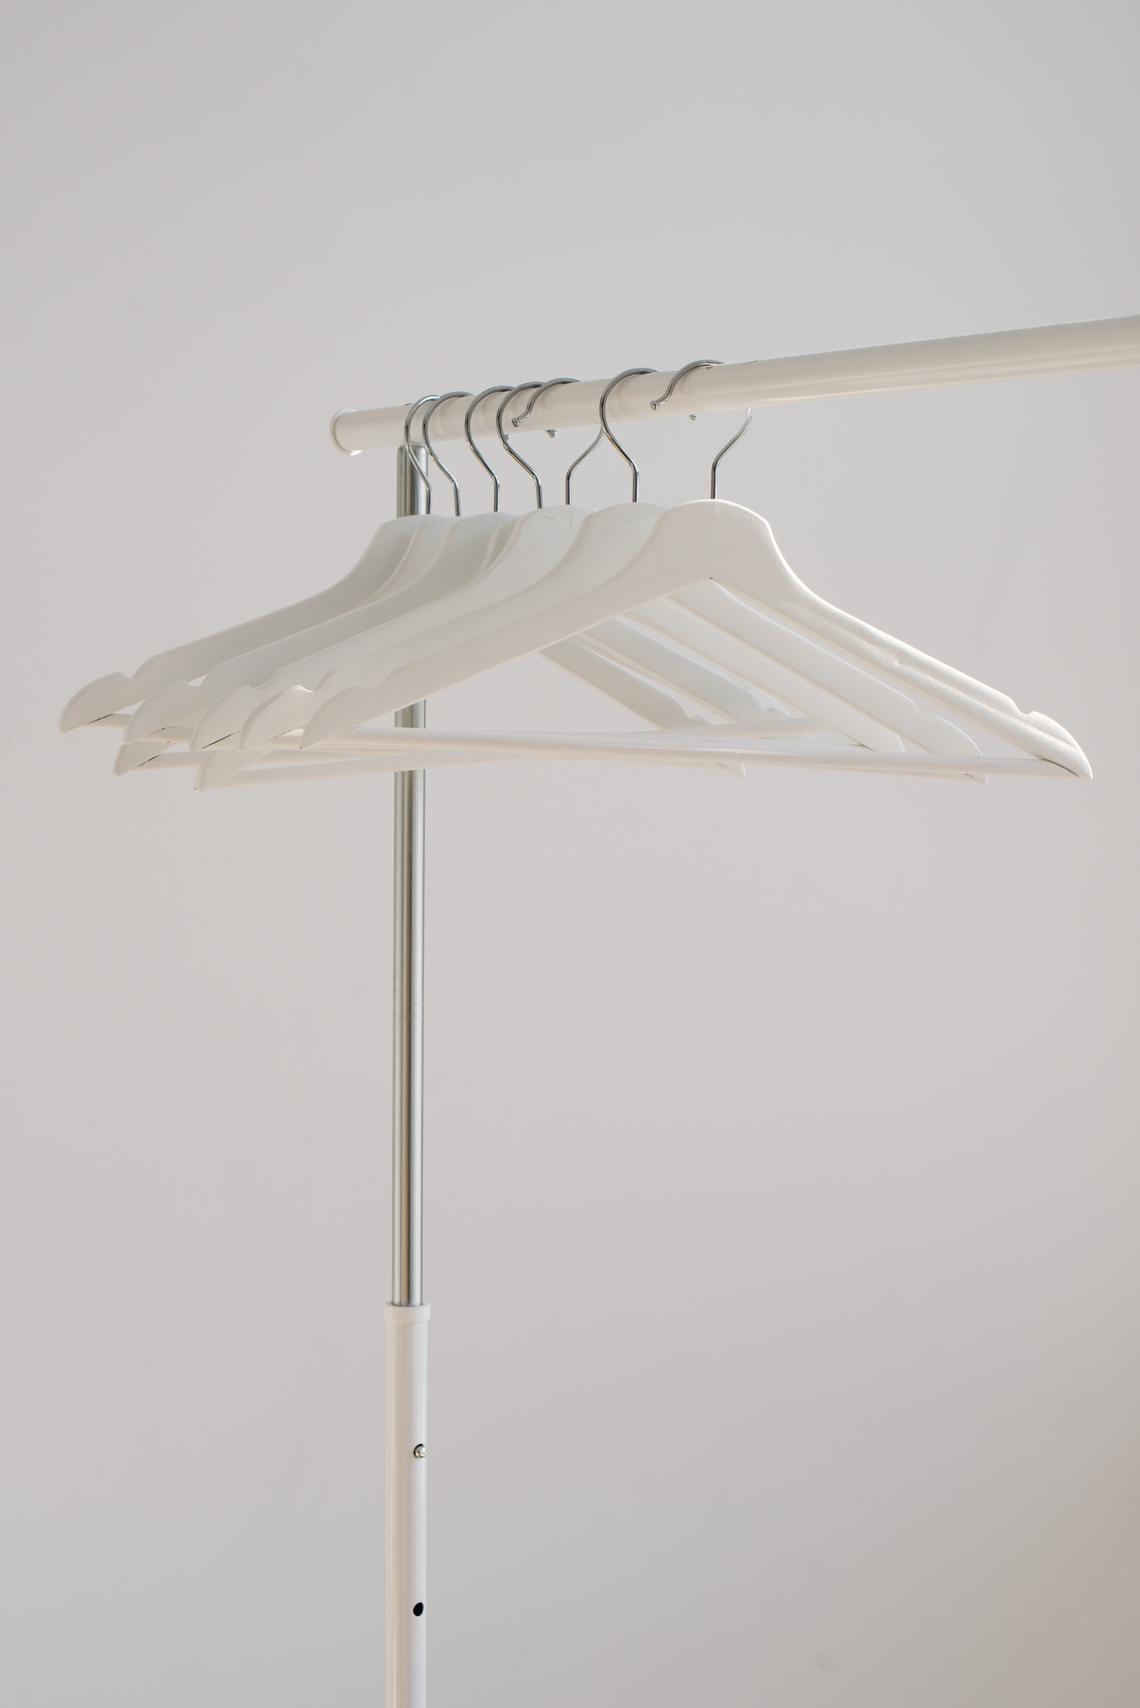 White hangers hanging on a metal clothing rack